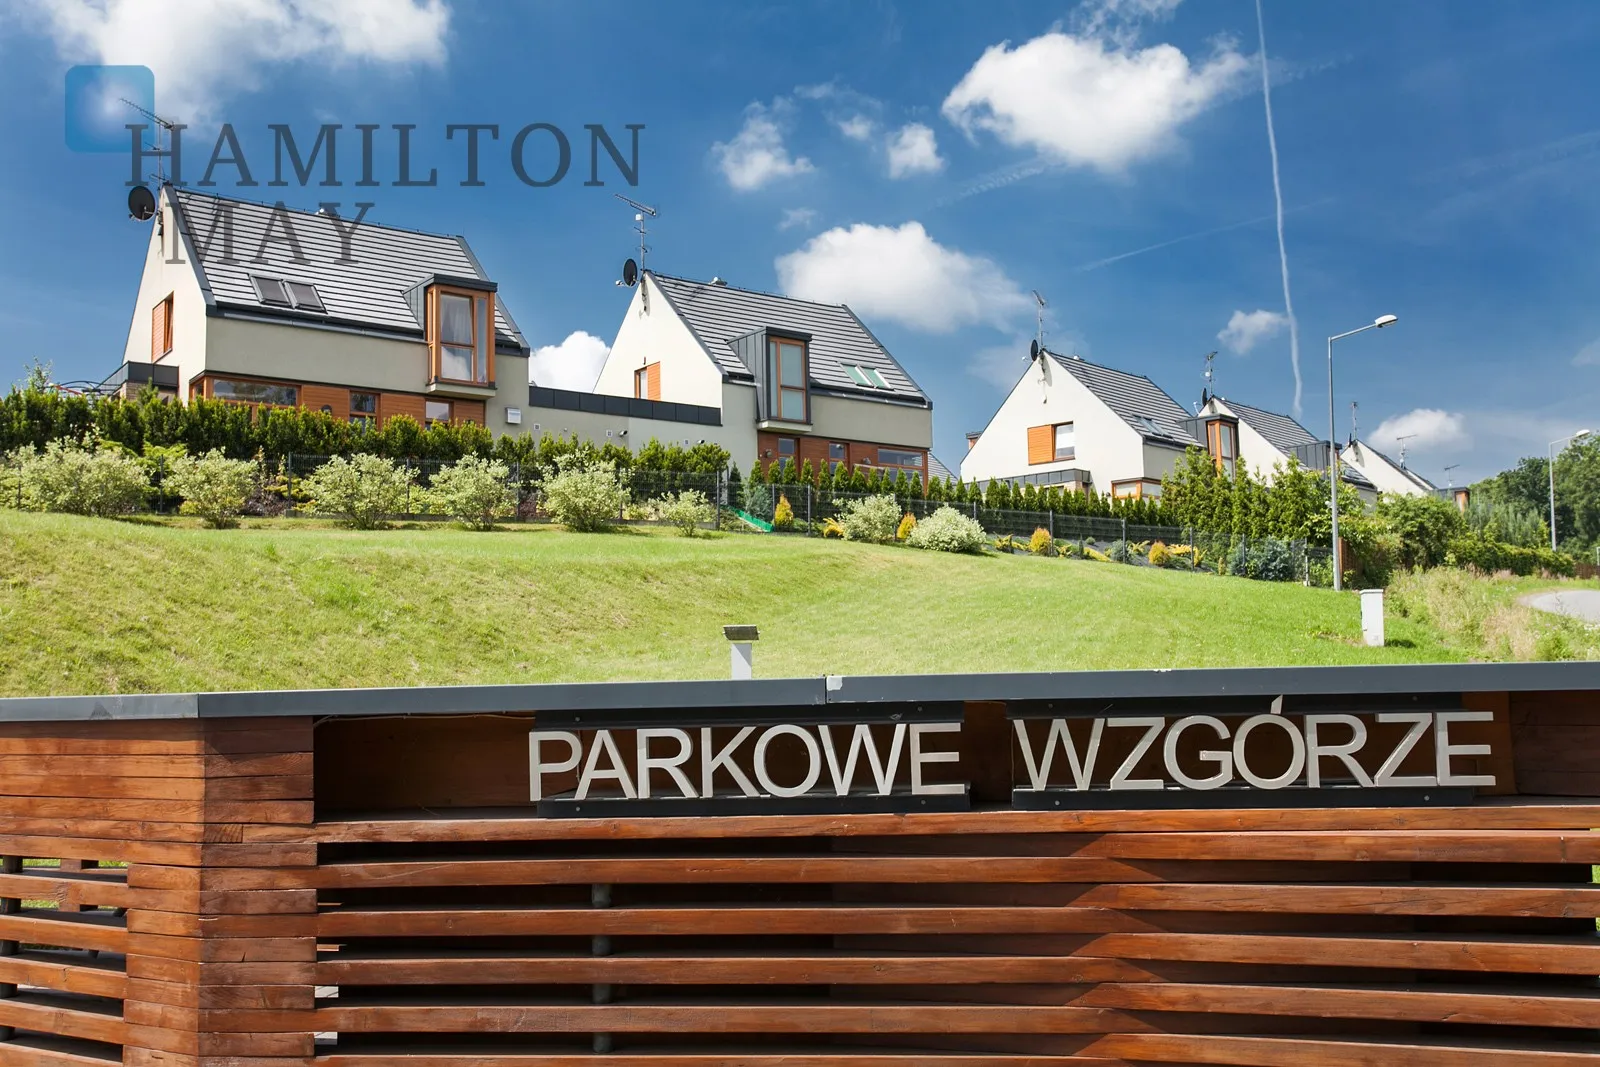 For rent a brand new, luxury semi-detached house located in the gated residential neighborhood "Parkowe Wzgórze" - Mogilany (South Kraków).